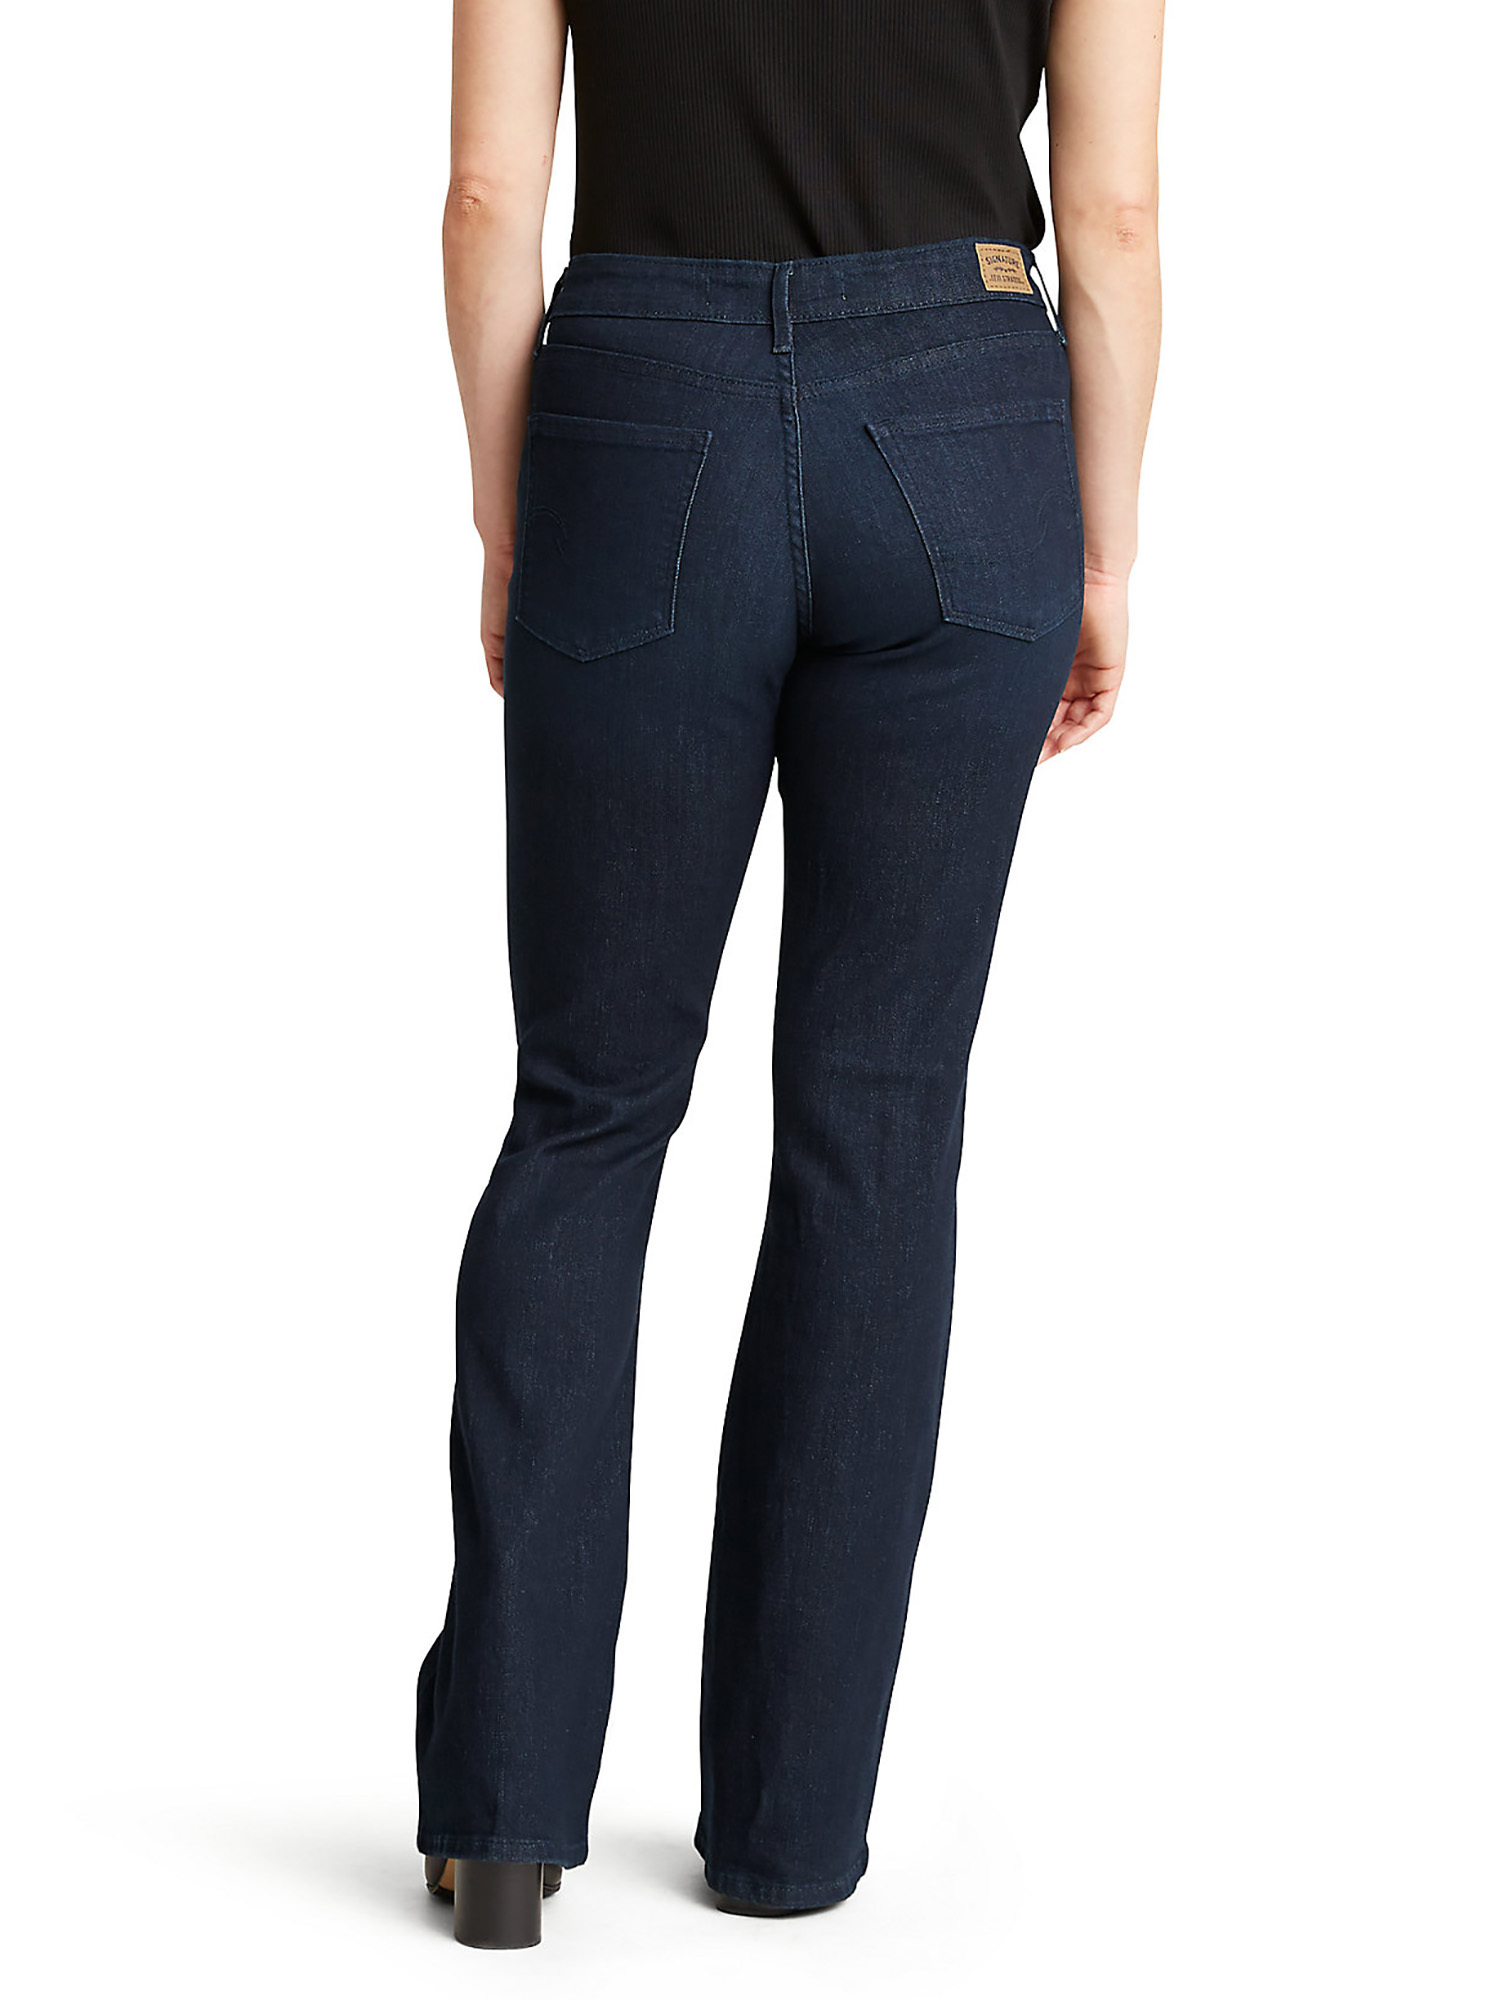 Signature by Levi Strauss & Co. Women's and Women's Plus Modern Bootcut Jeans - image 5 of 6